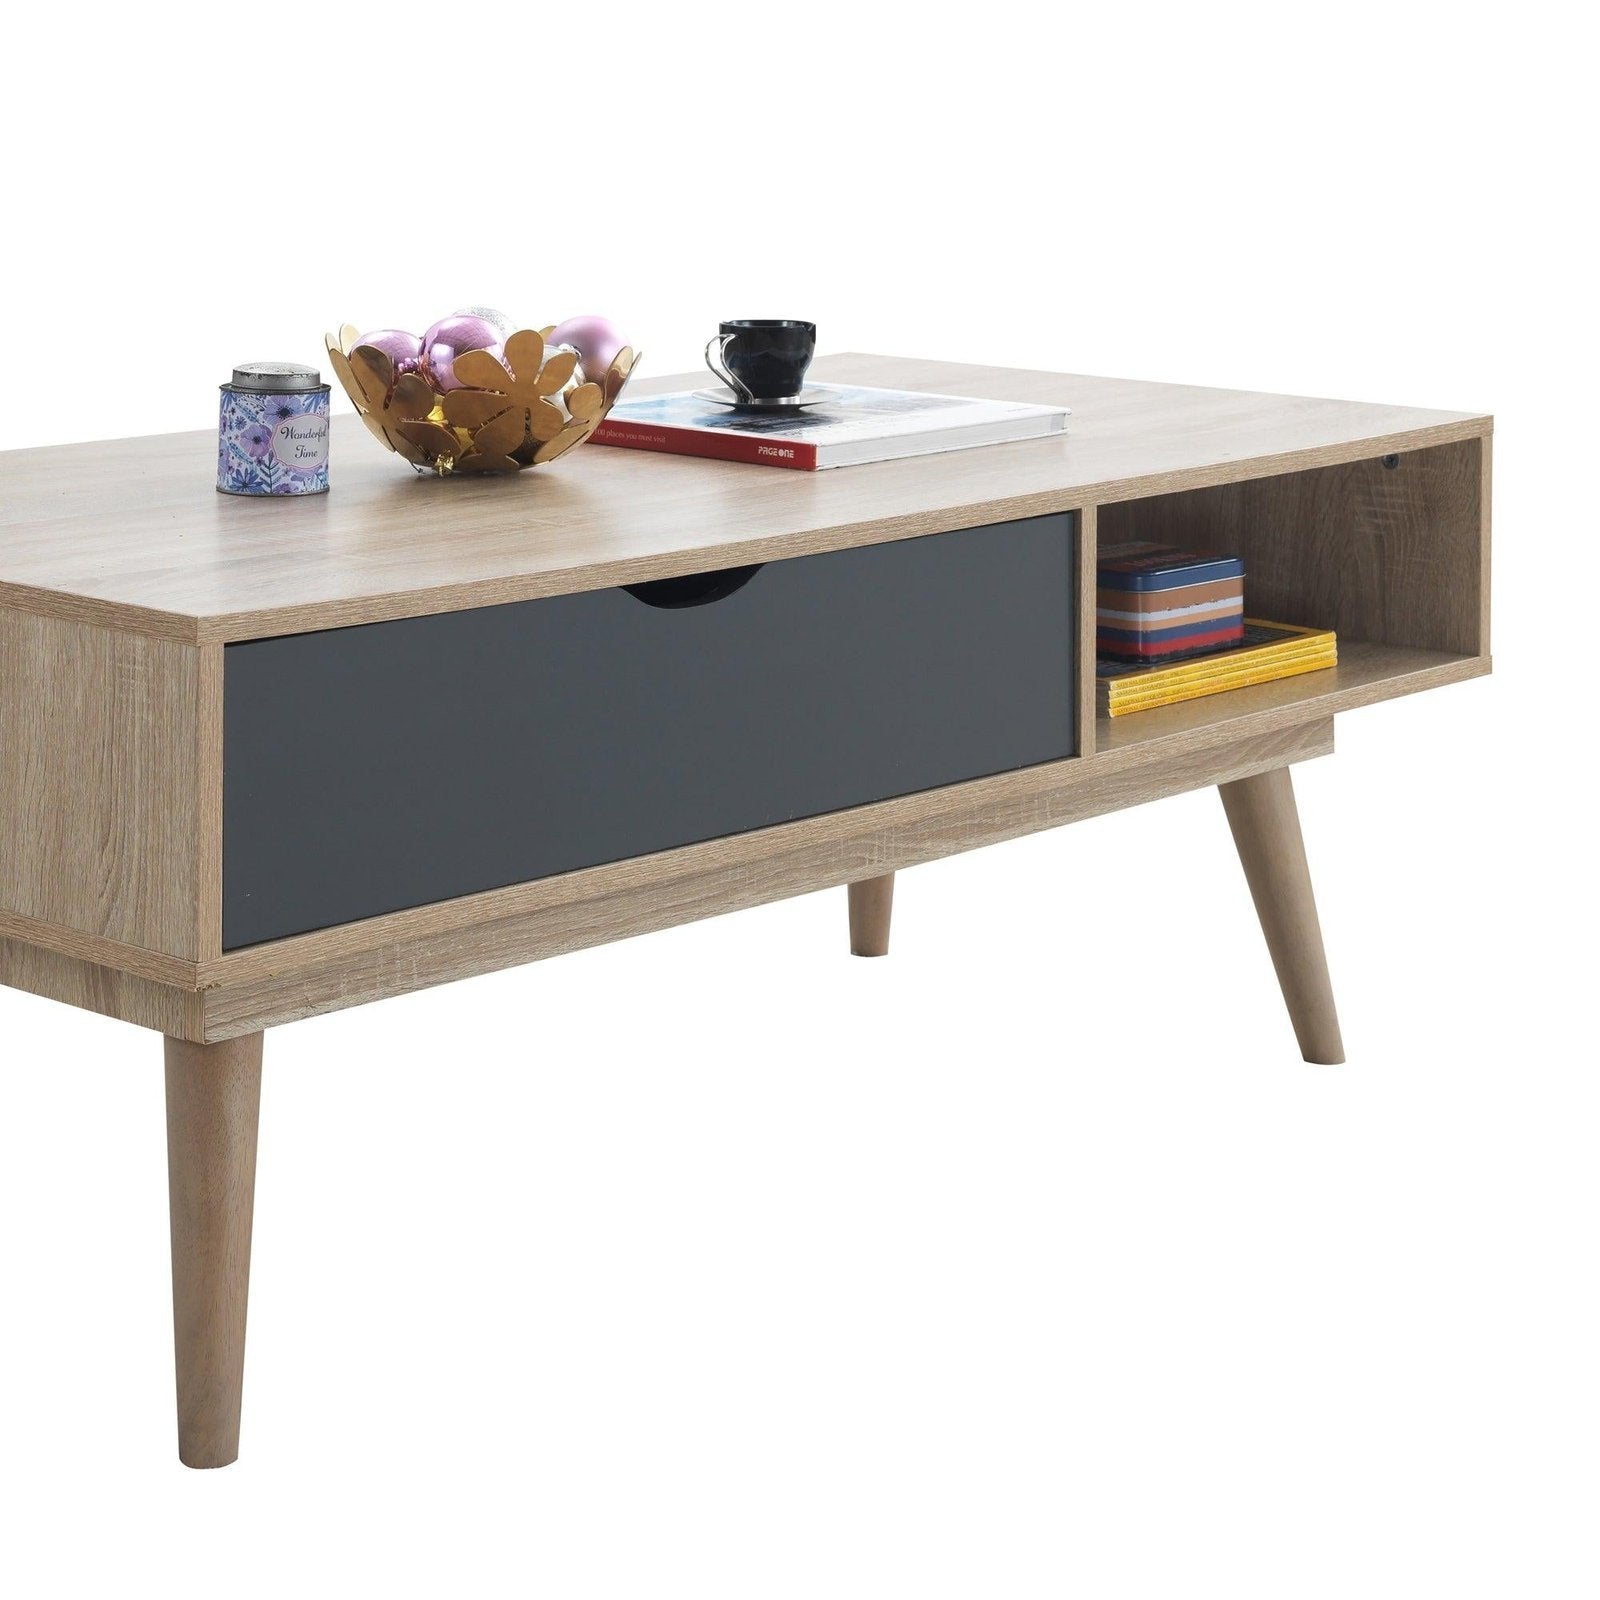 Alford Scandinavian Style Coffee Table with 1 Drawer & 2 Open Shelves